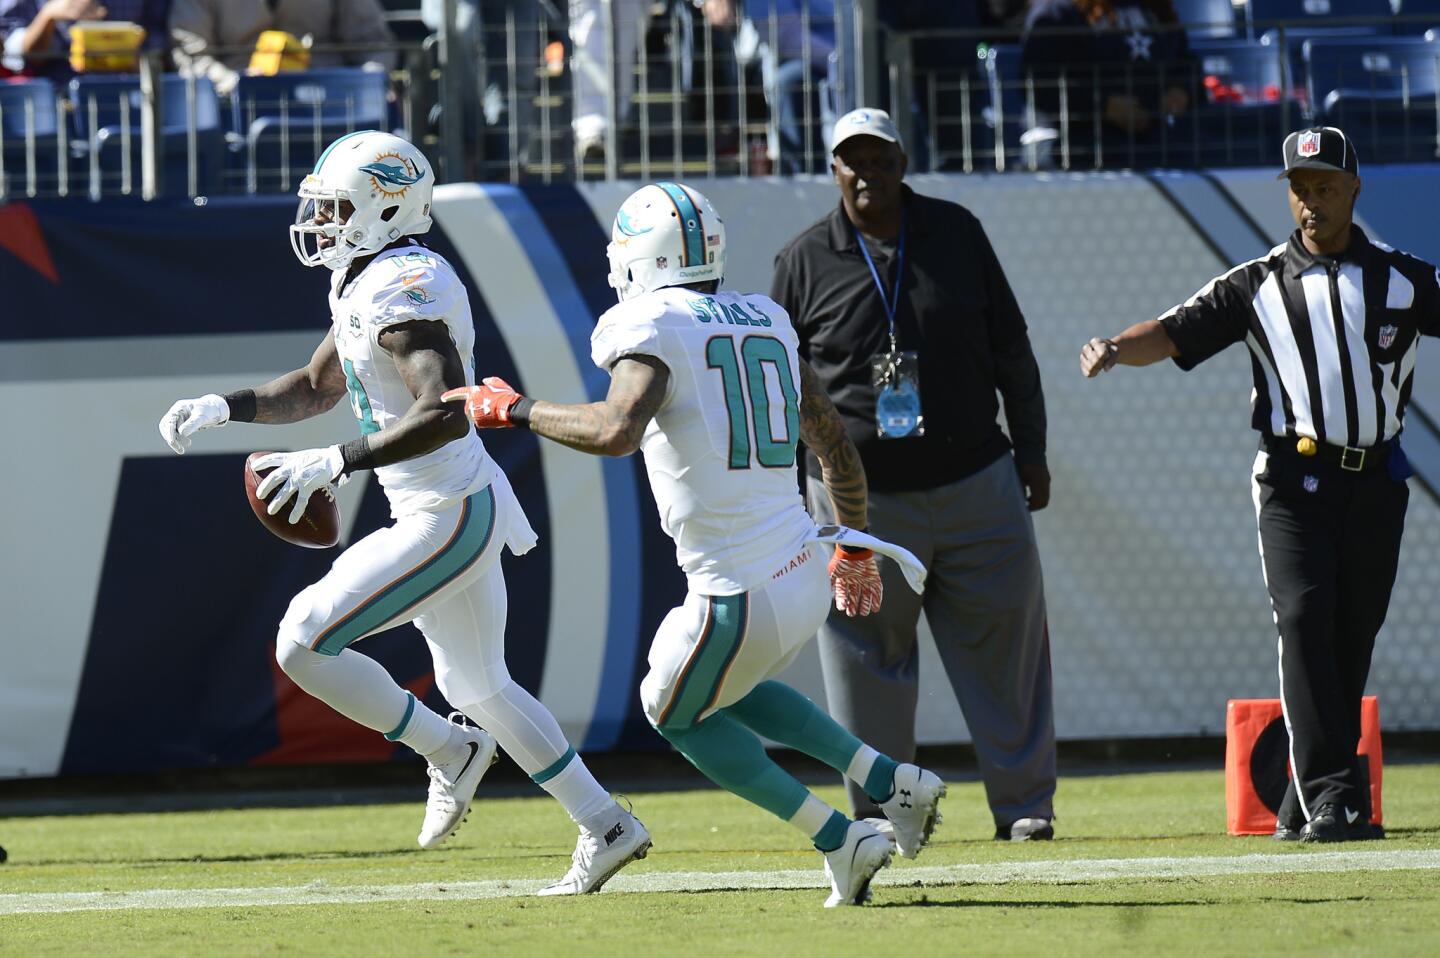 Miami Dolphins wide receiver Jarvis Landry (14) scores a touchdown against the Tennessee Titans in the first half of an NFL football game Sunday, Oct. 18, 2015, in Nashville, Tenn. At right is wide receiver Kenny Stills (10). (AP Photo/Mark Zaleski) ORG XMIT: TNMH1